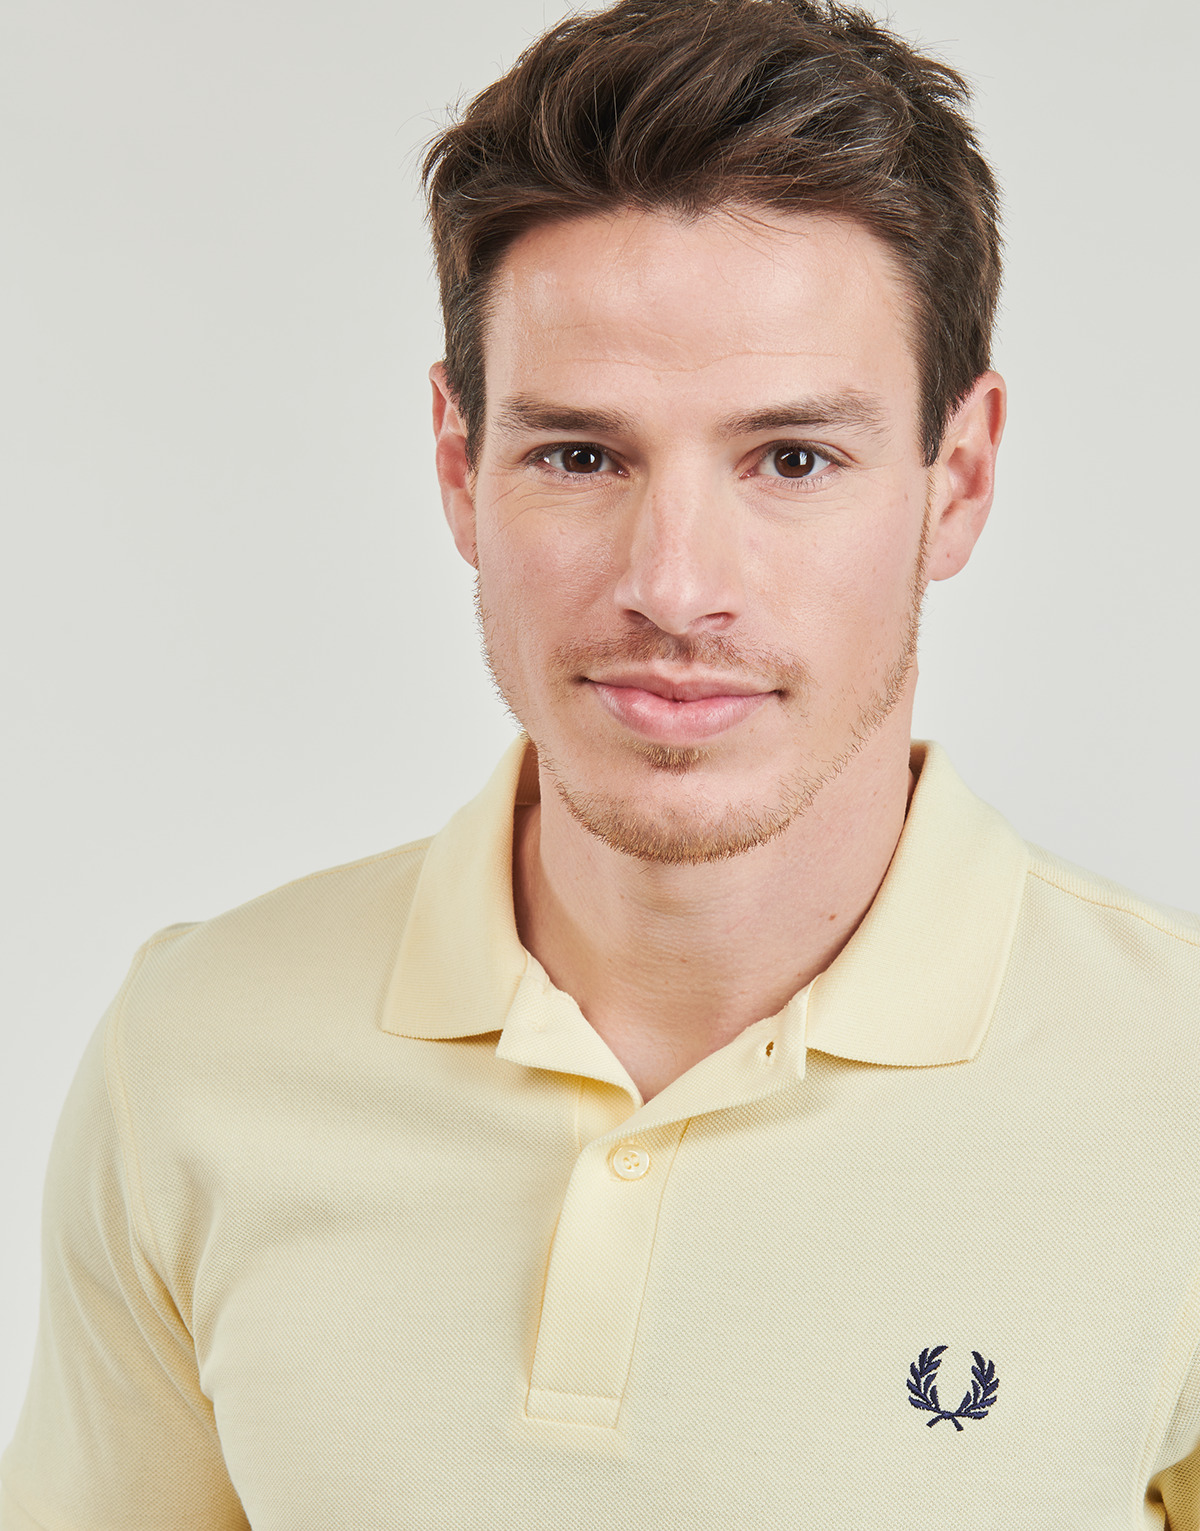 Fred Perry Jaune / Marine PLAIN FRED PERRY SHIRT ZPmqLZBP